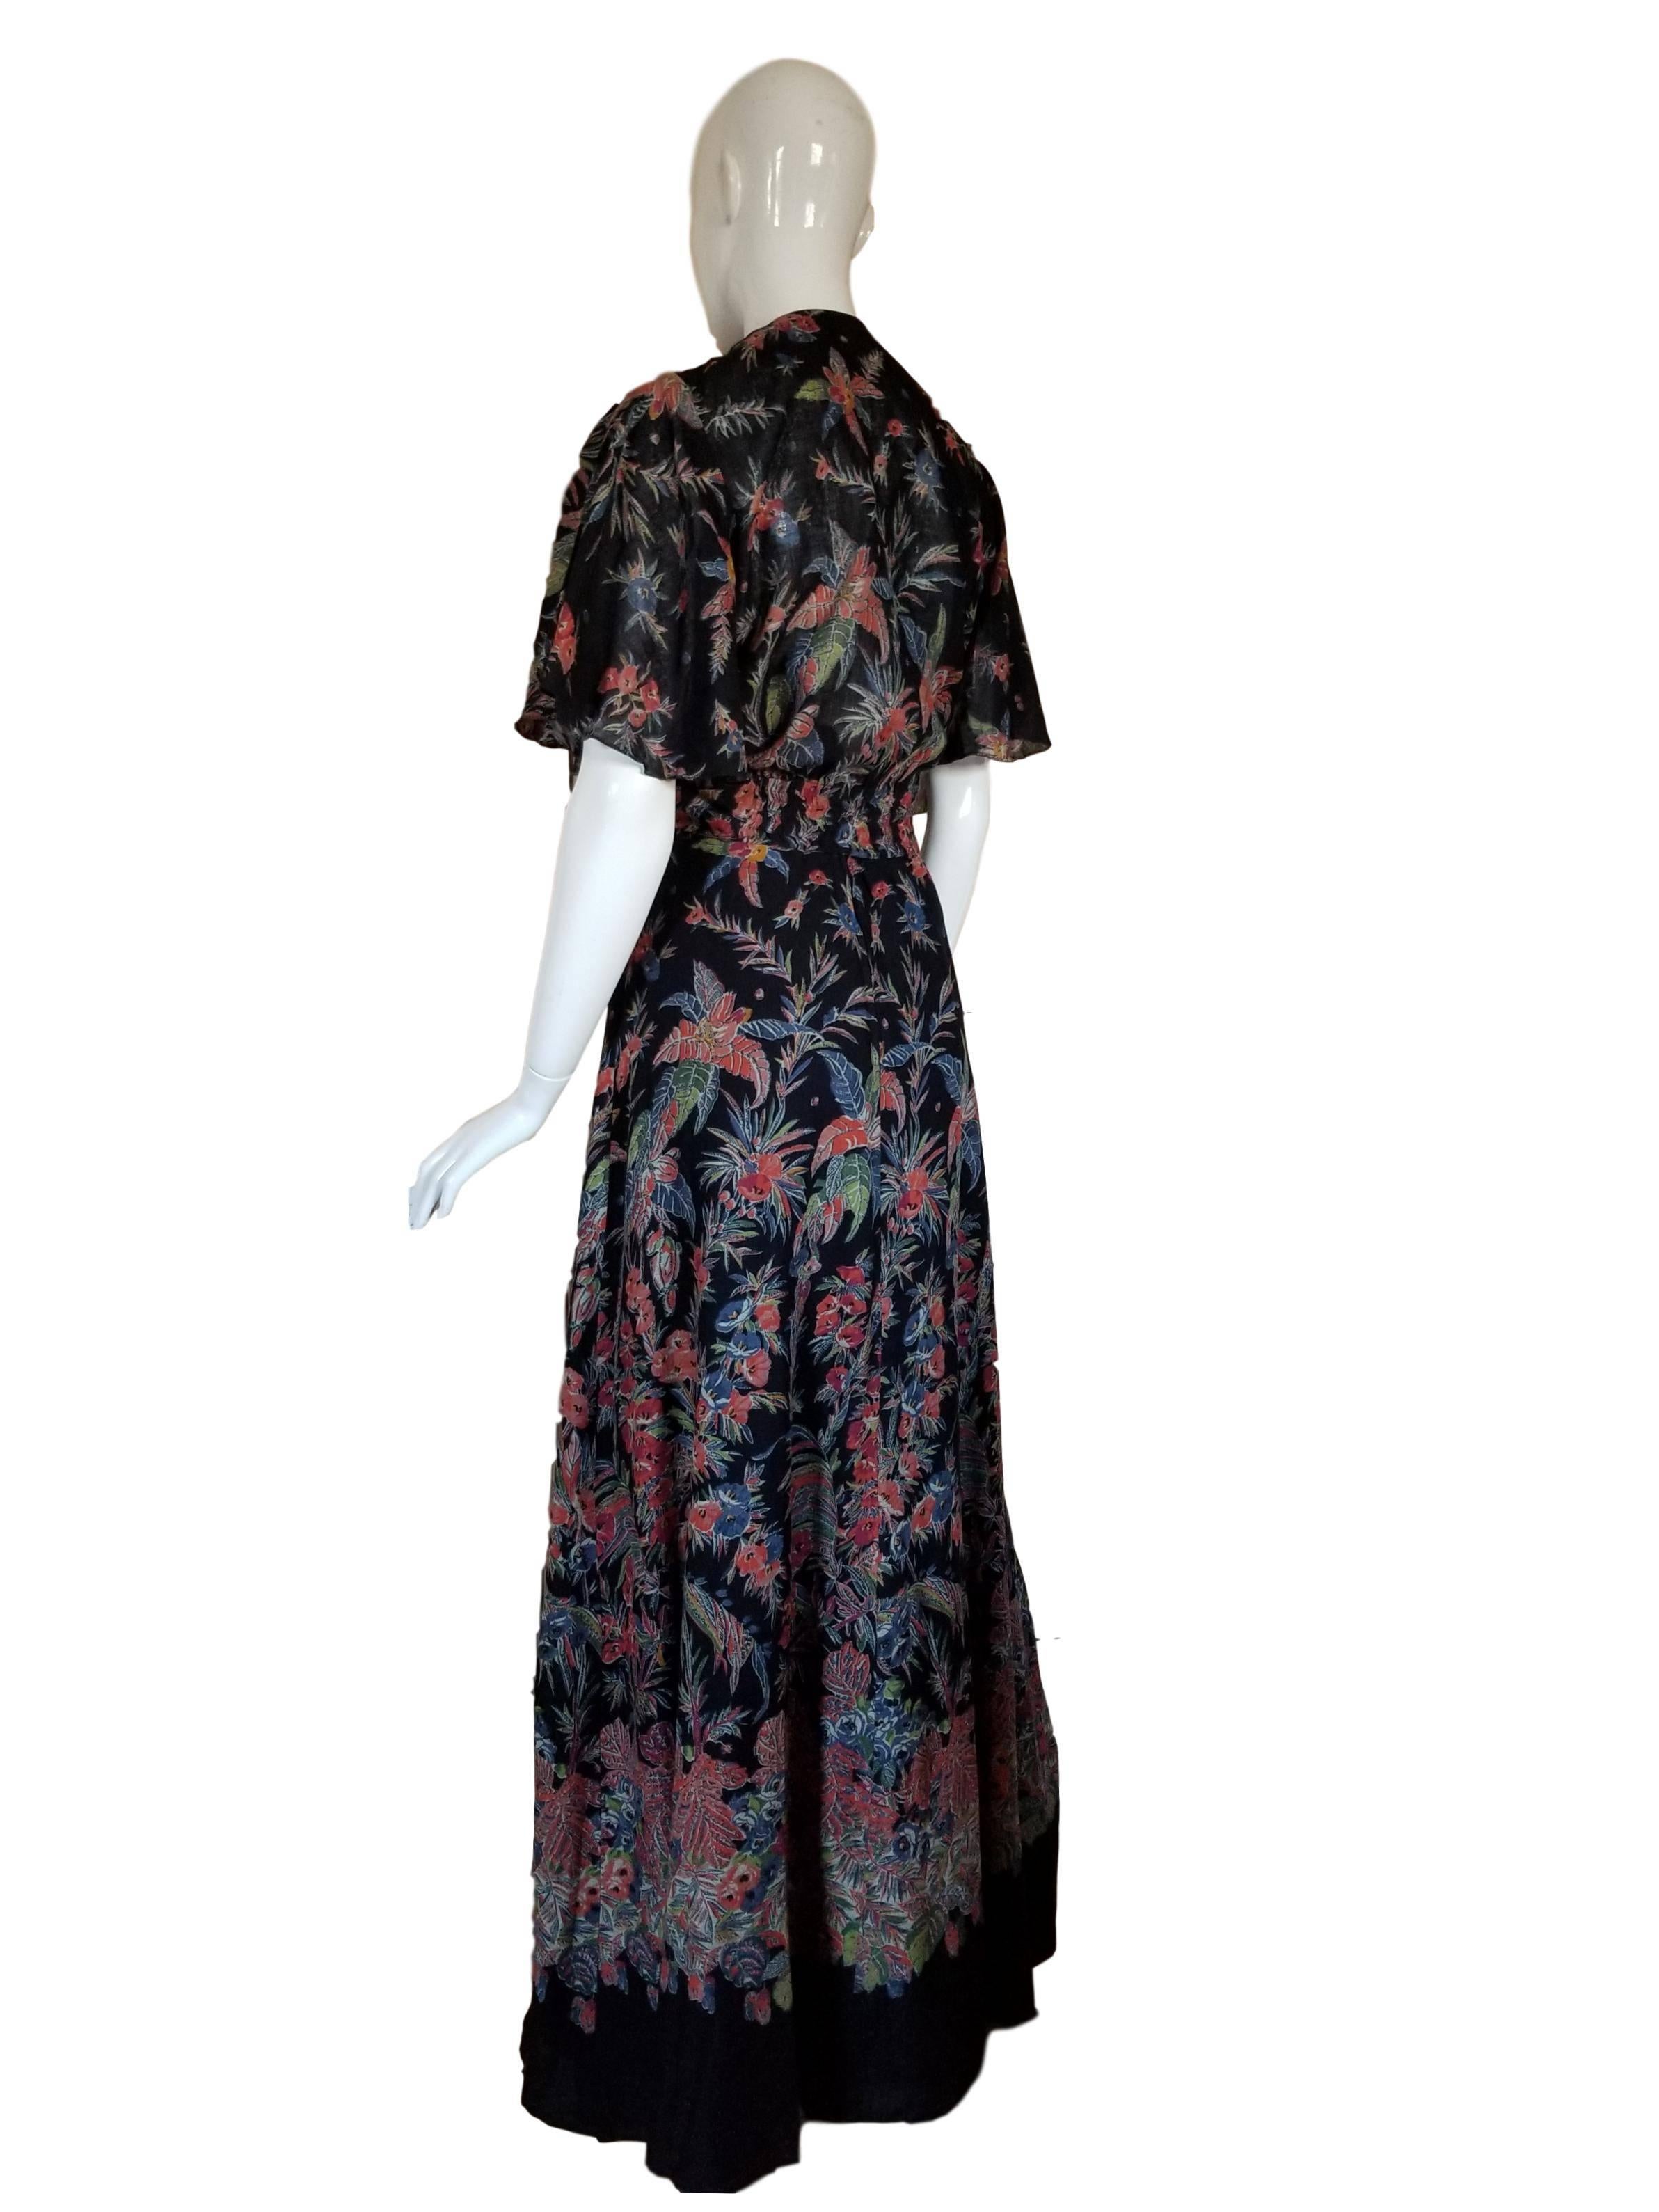 Vintage cotton floral maxi dress by Puszta, with elasticated bust and cross back thin straps. Fastens with a zip and has matching bolero.

Excellent condition.

To fit a UK size 10/12 measures 18-19 inches with stretch across bust, 13-14 inches